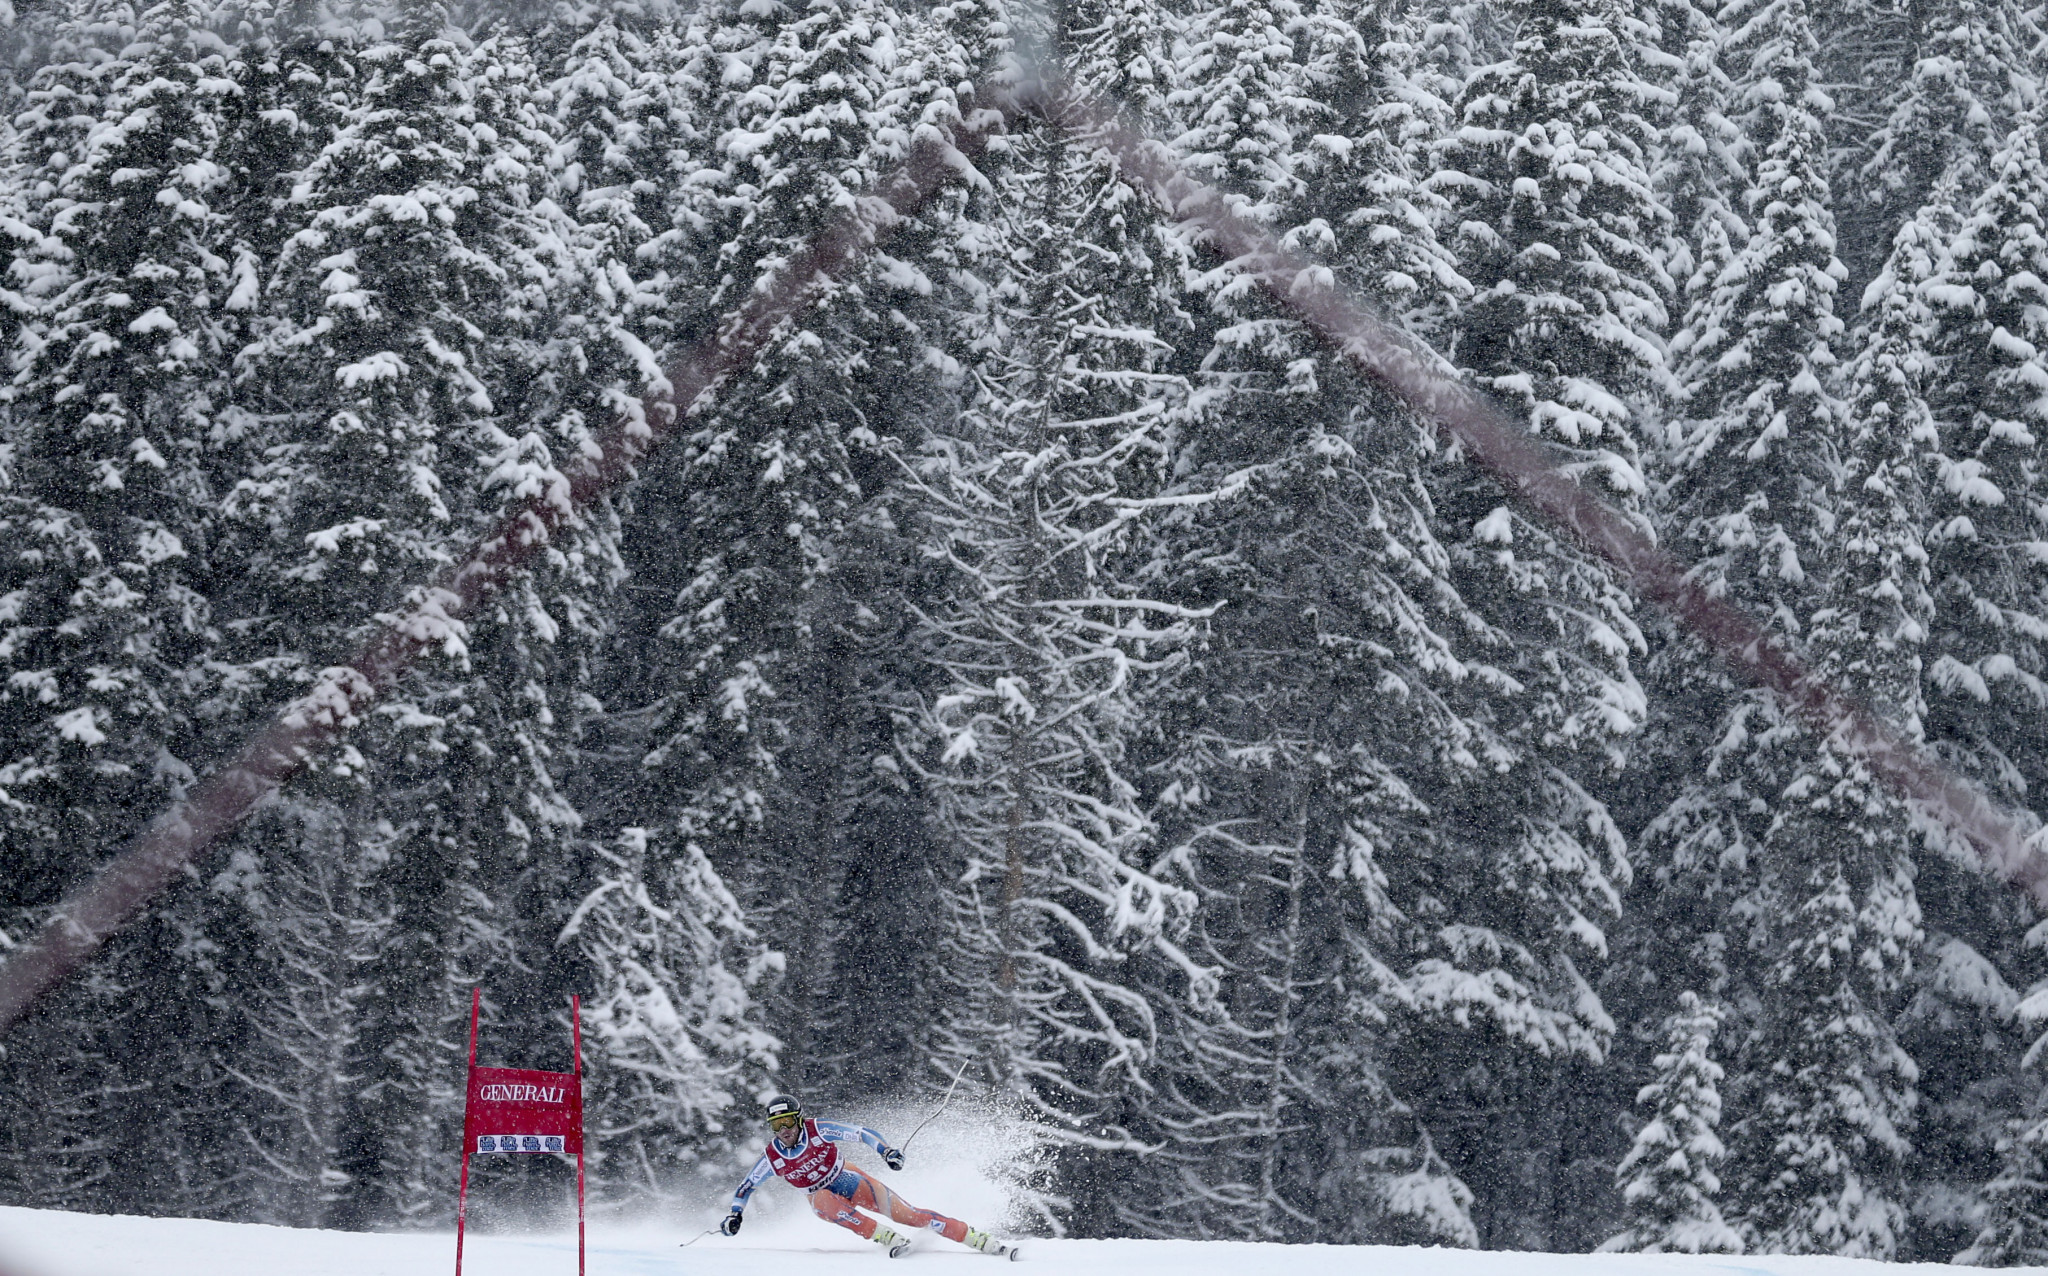 The Norwegian Ski Federation has said it does not want Russian athletes to compete at World Cups or World Championships held in the country ©Getty Images